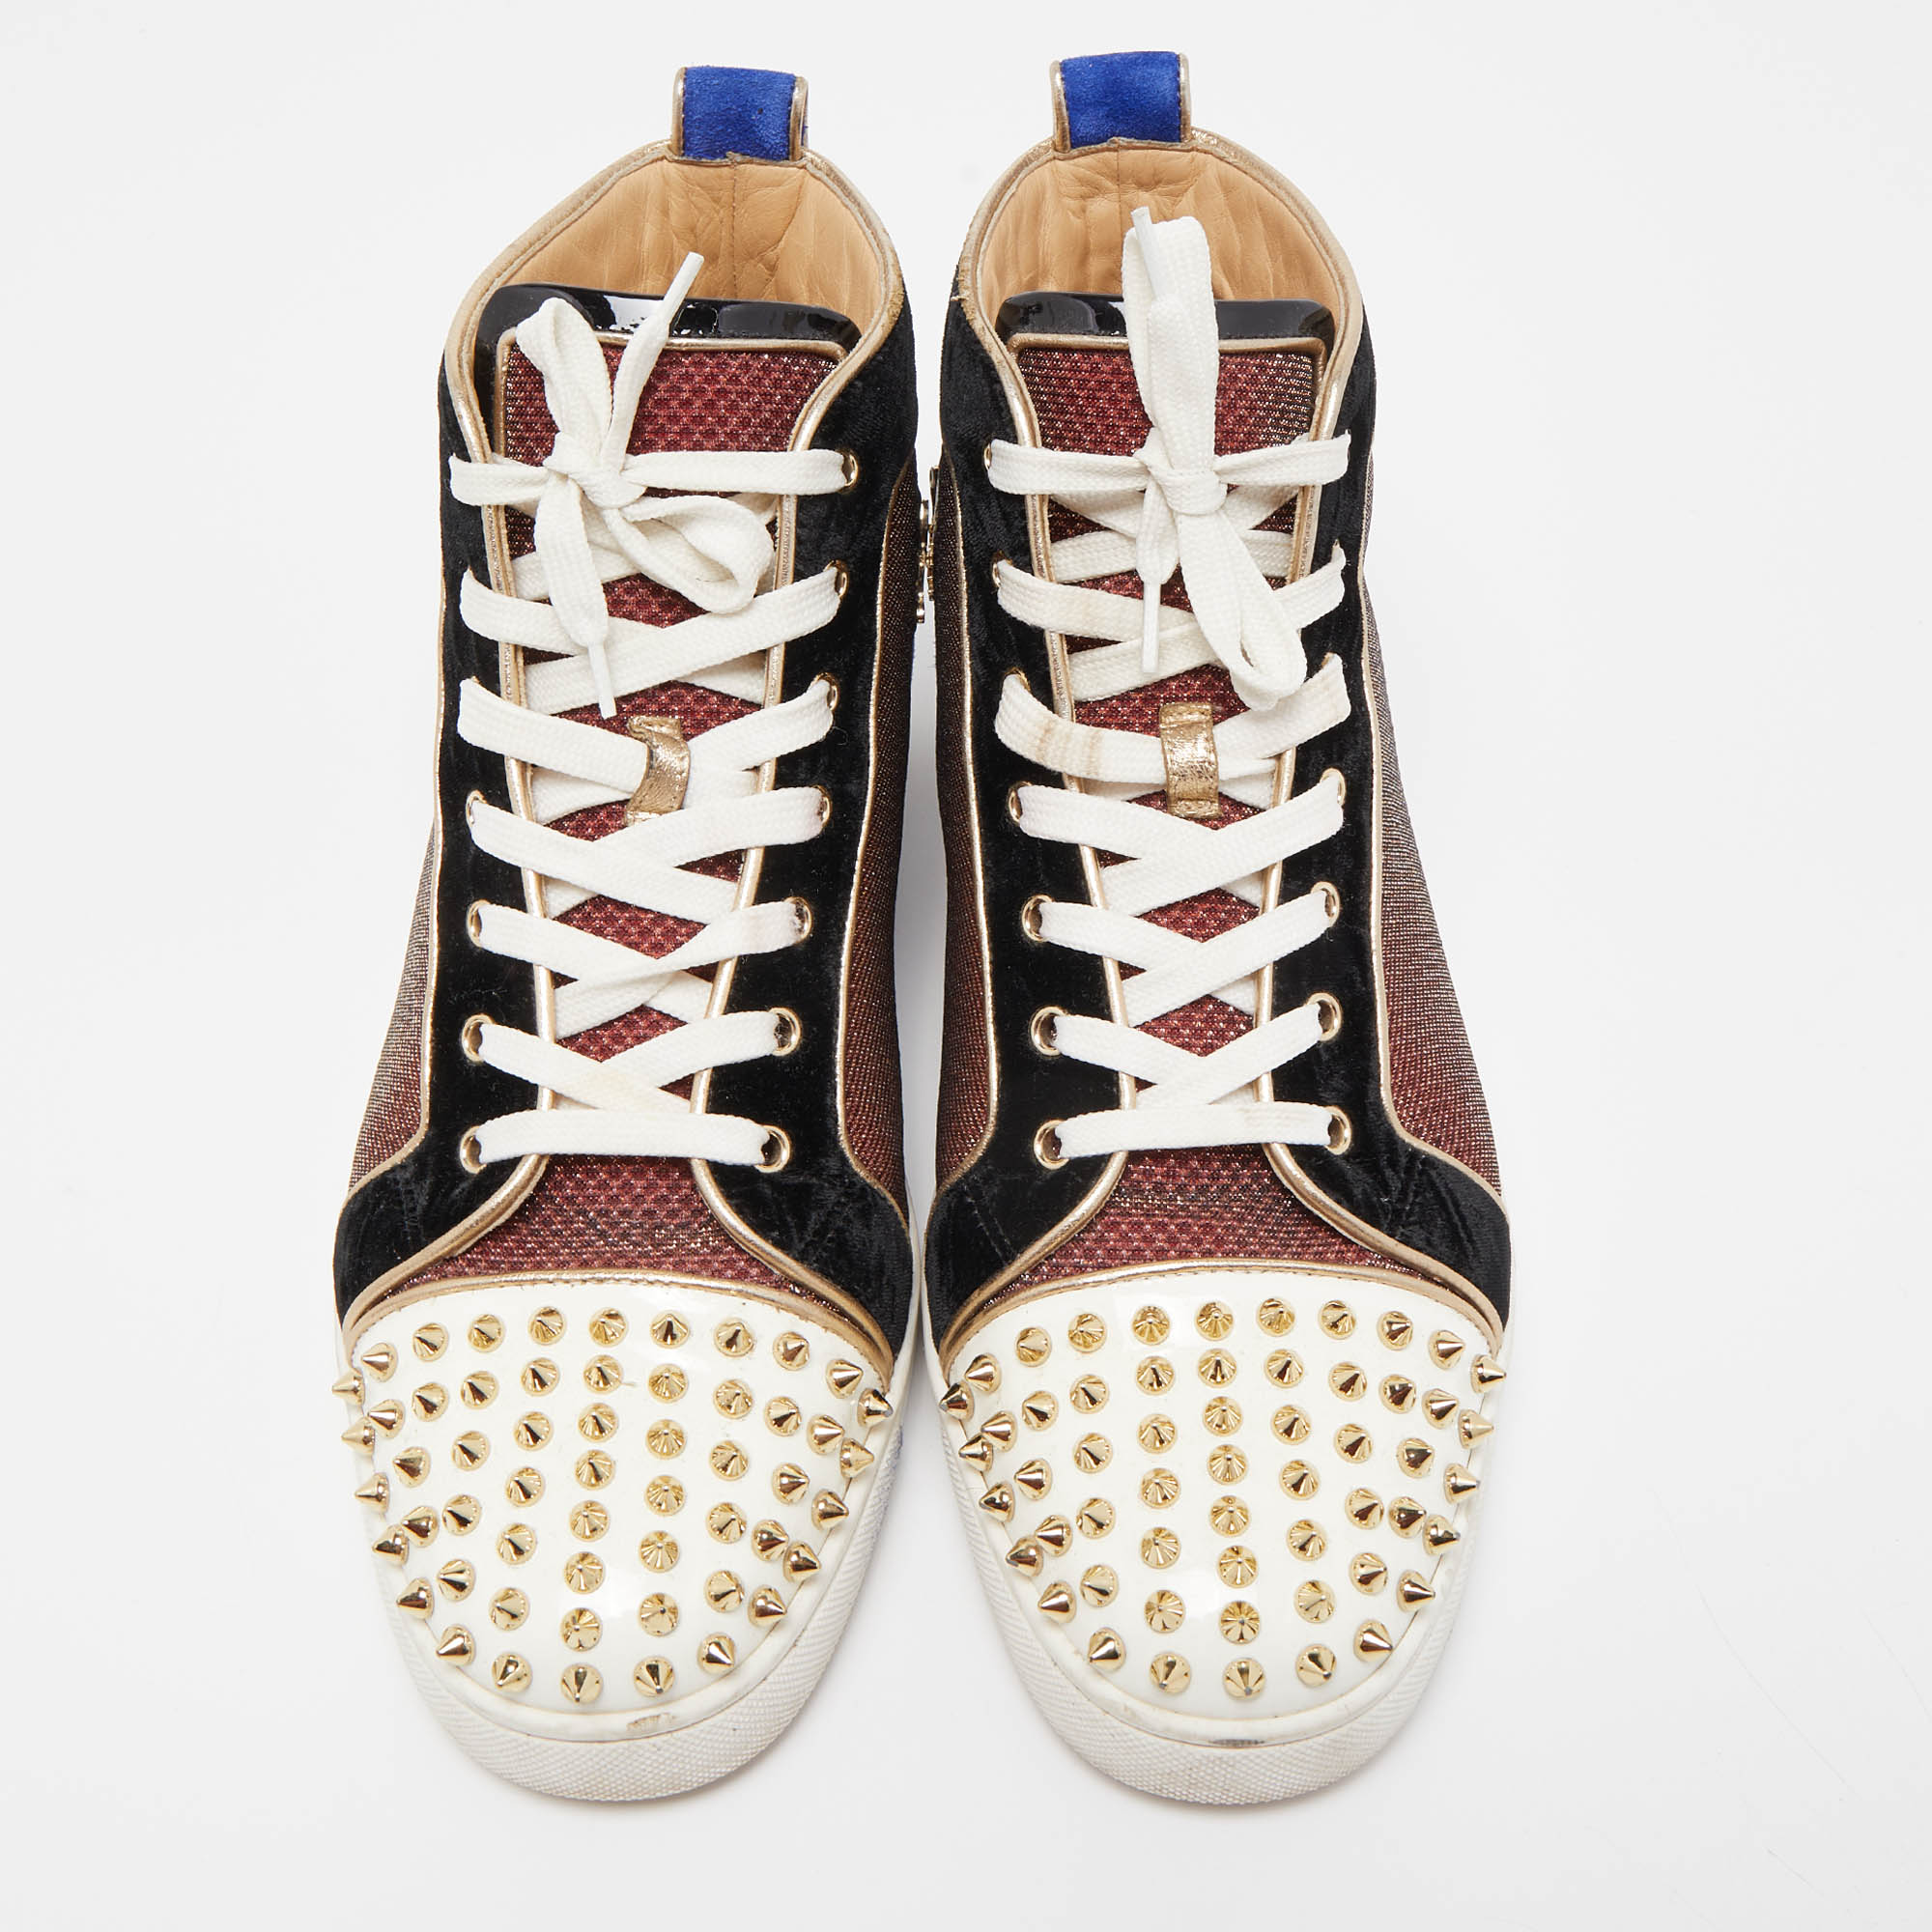 Christian Louboutin Multicolor Patent Leather, Velvet And Fabric Louis Spike High Top Sneakers Size 42.5